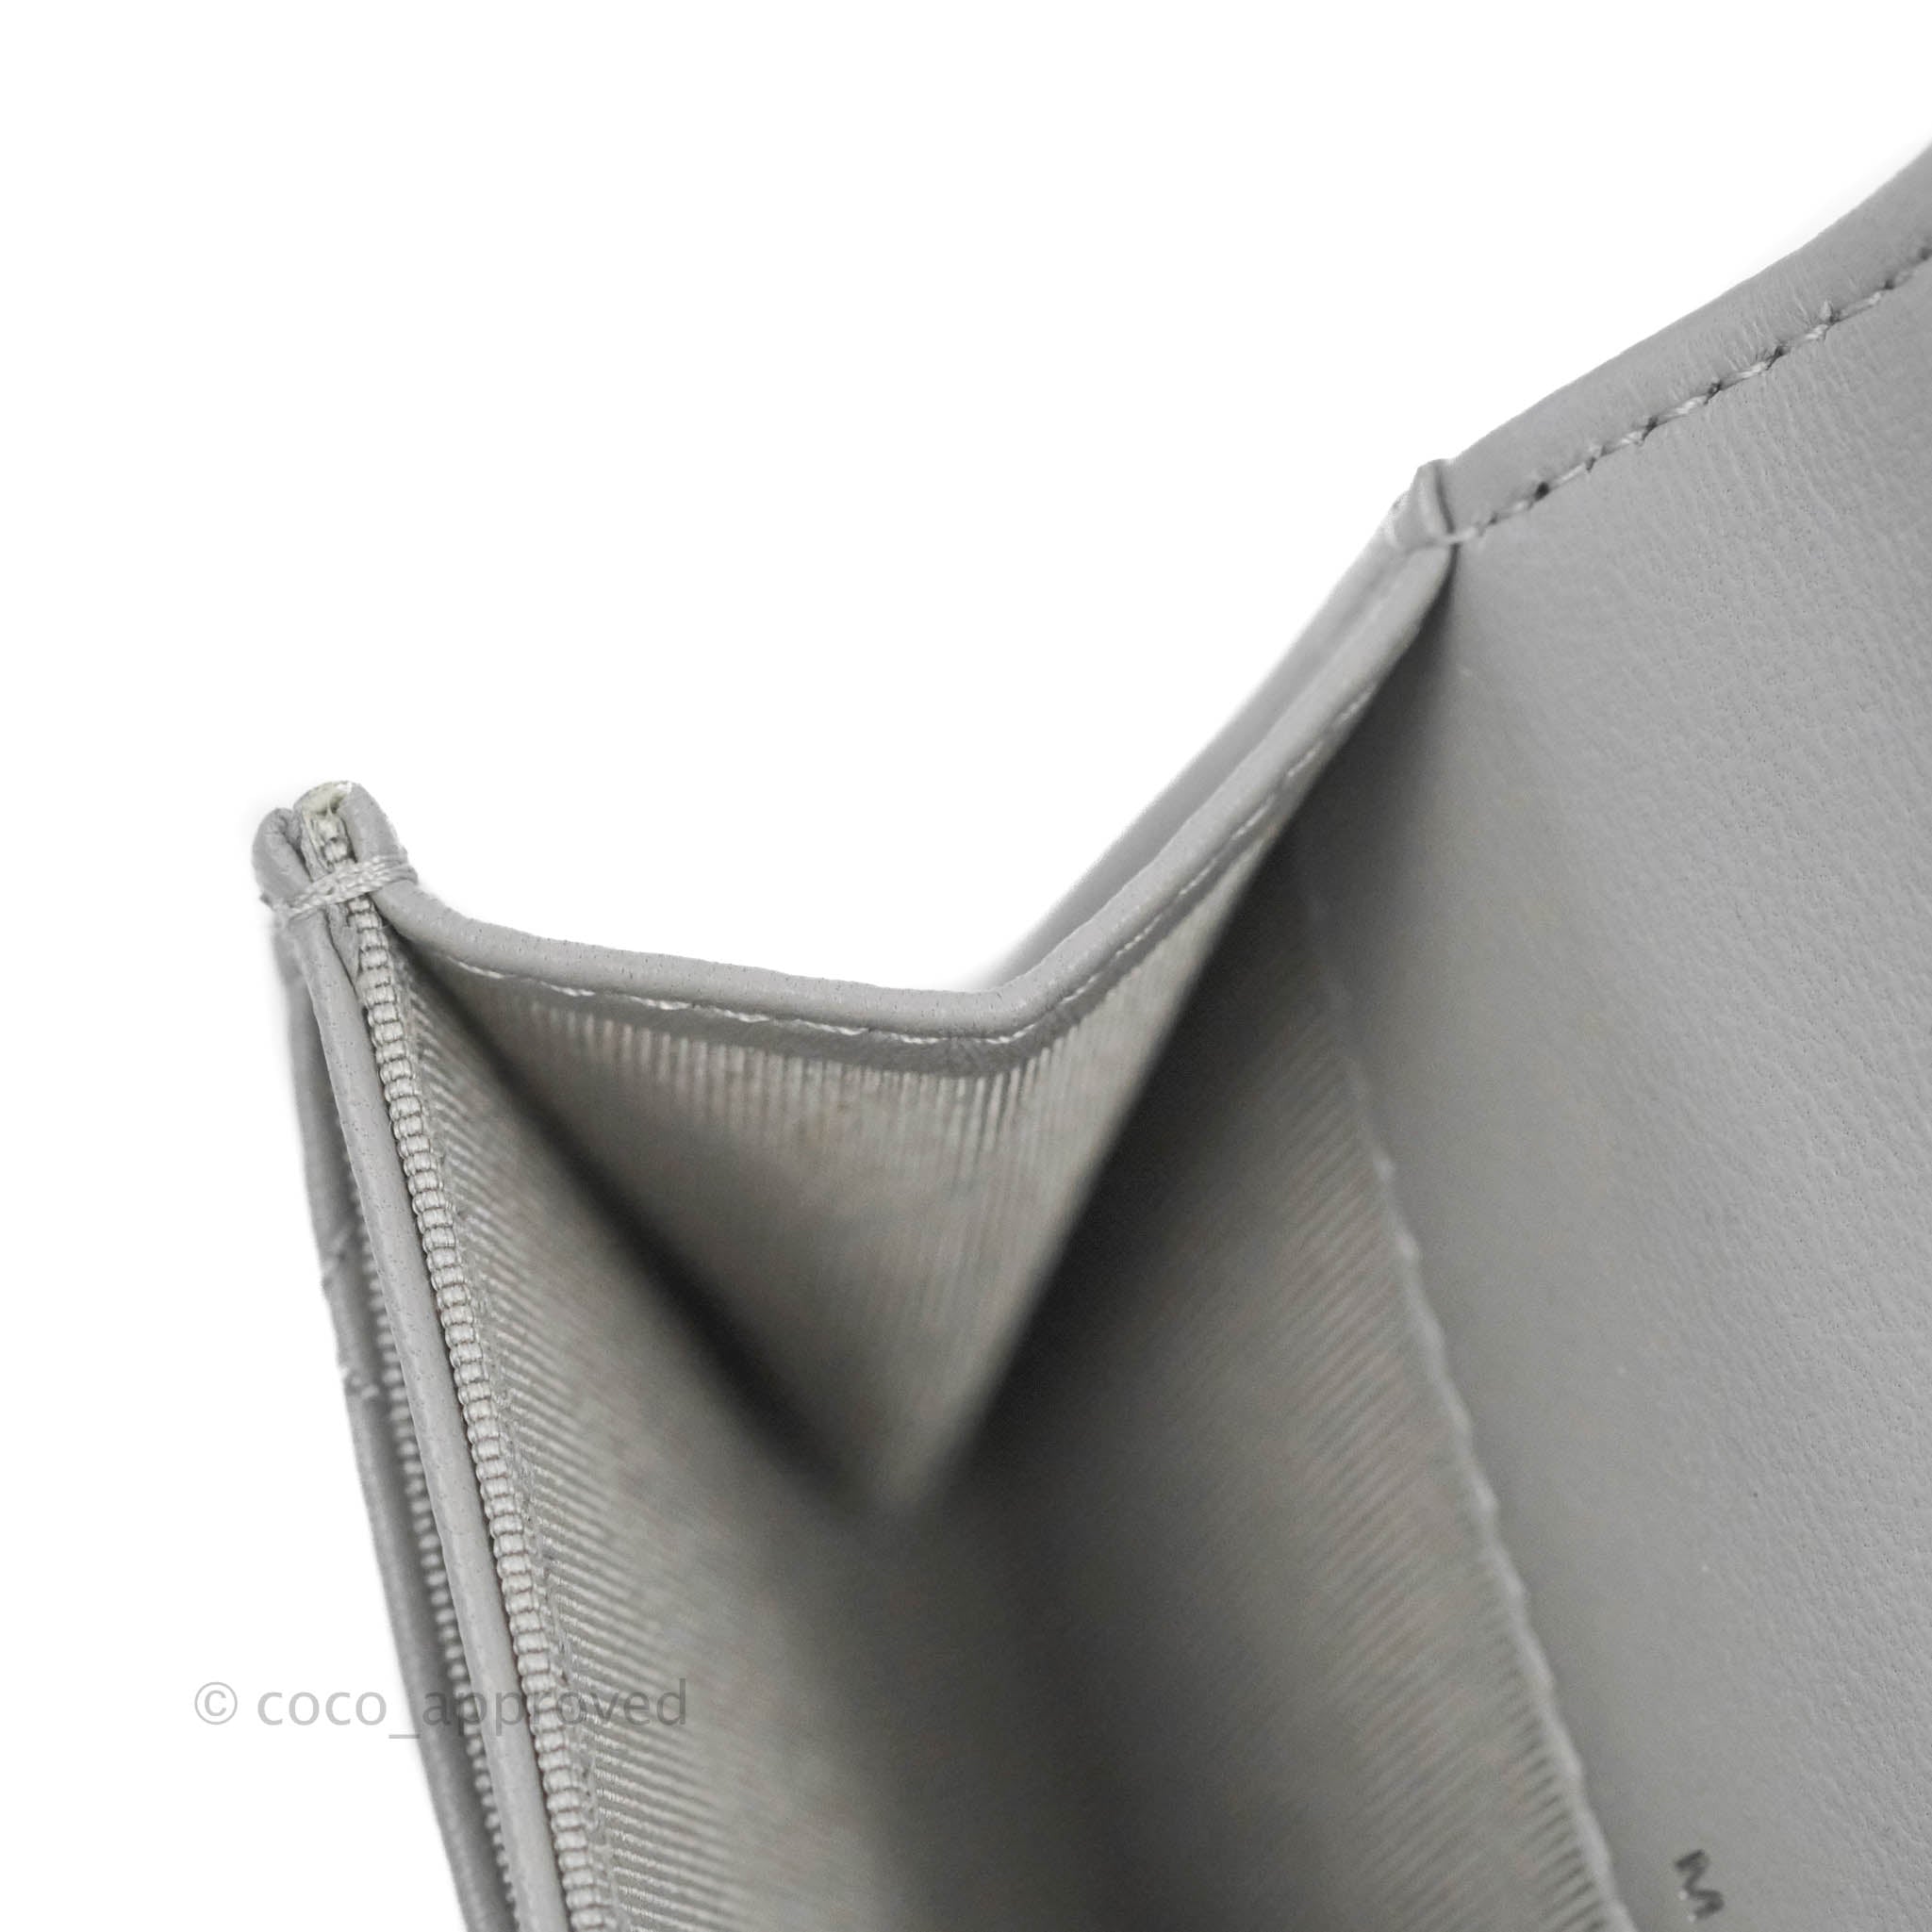 Chanel Quilted Flap Card Holder Grey Lambskin Silver Hardware